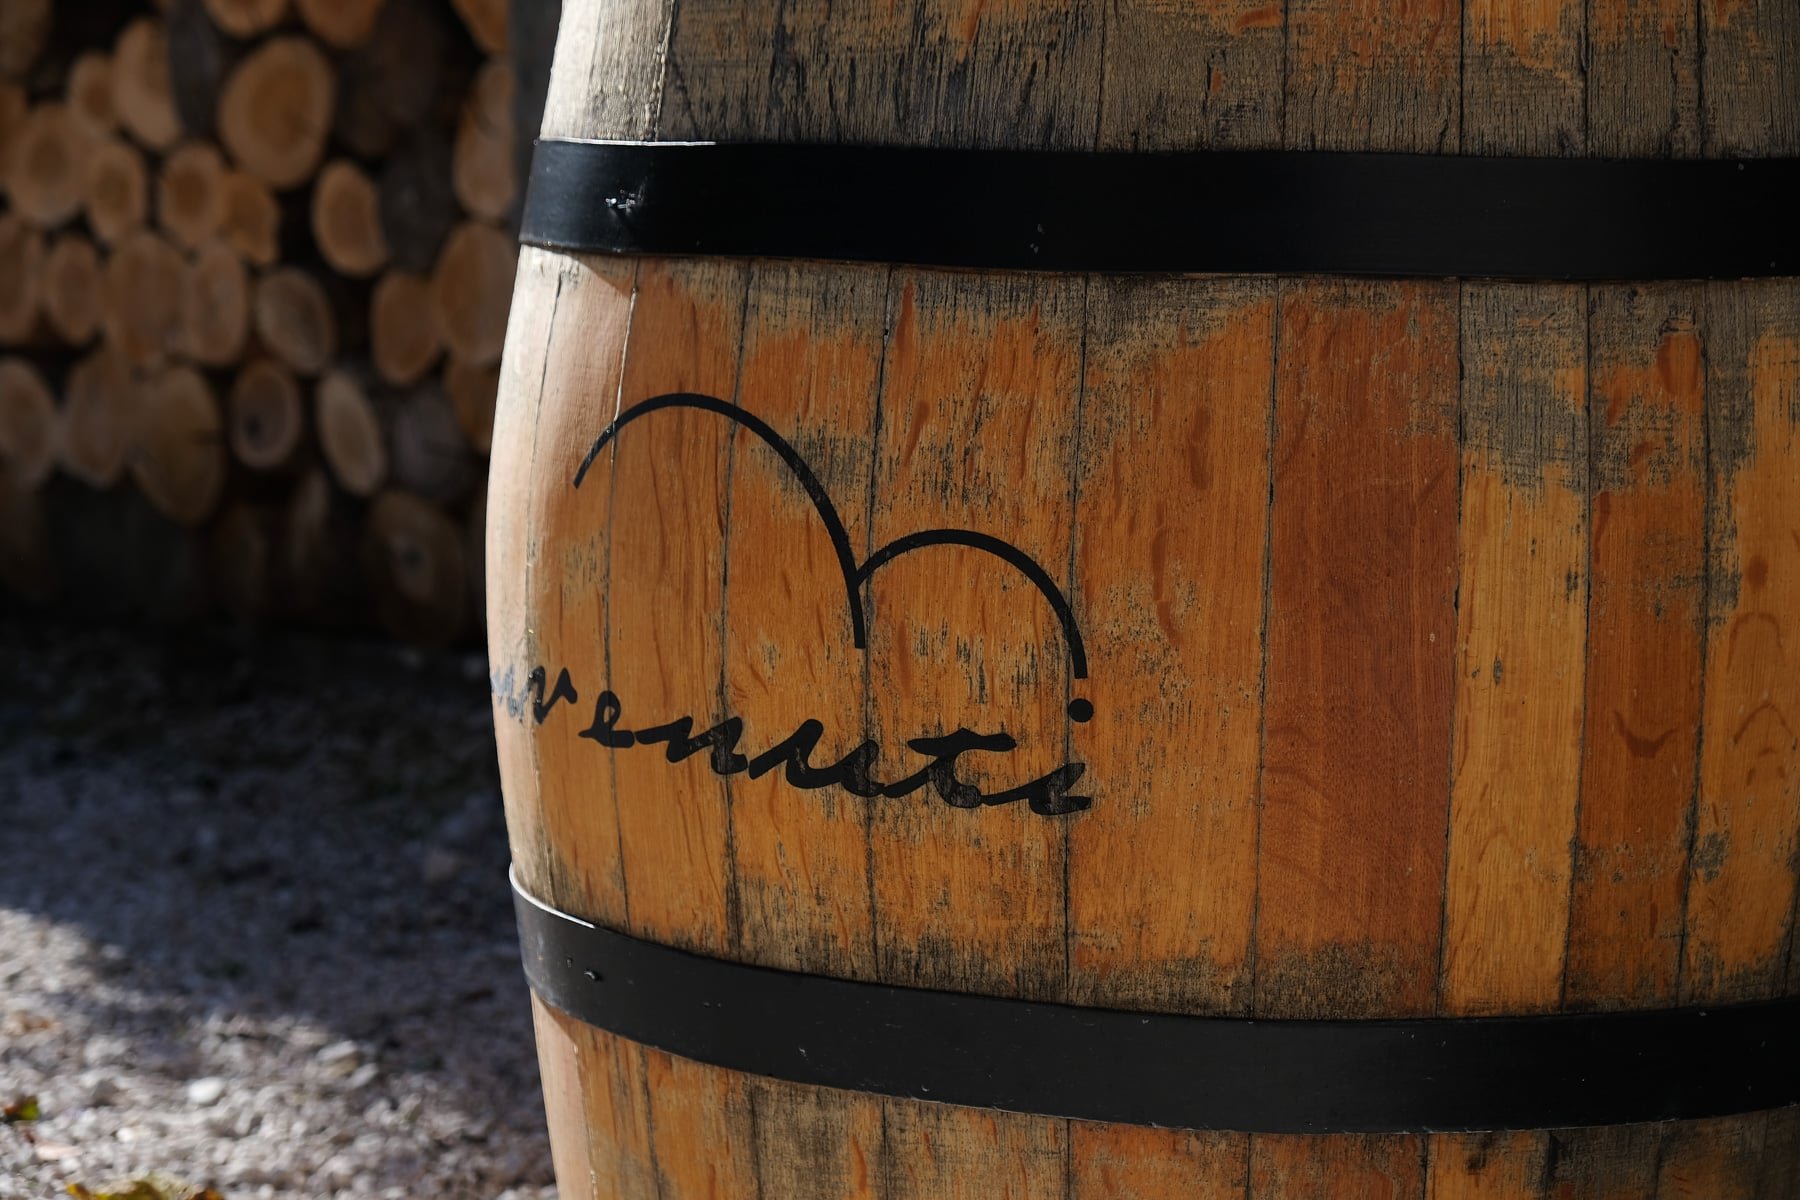 A wooden barrel with a logo on it in front of a pile of logs from Istria at benvenuti Winery, Istria.